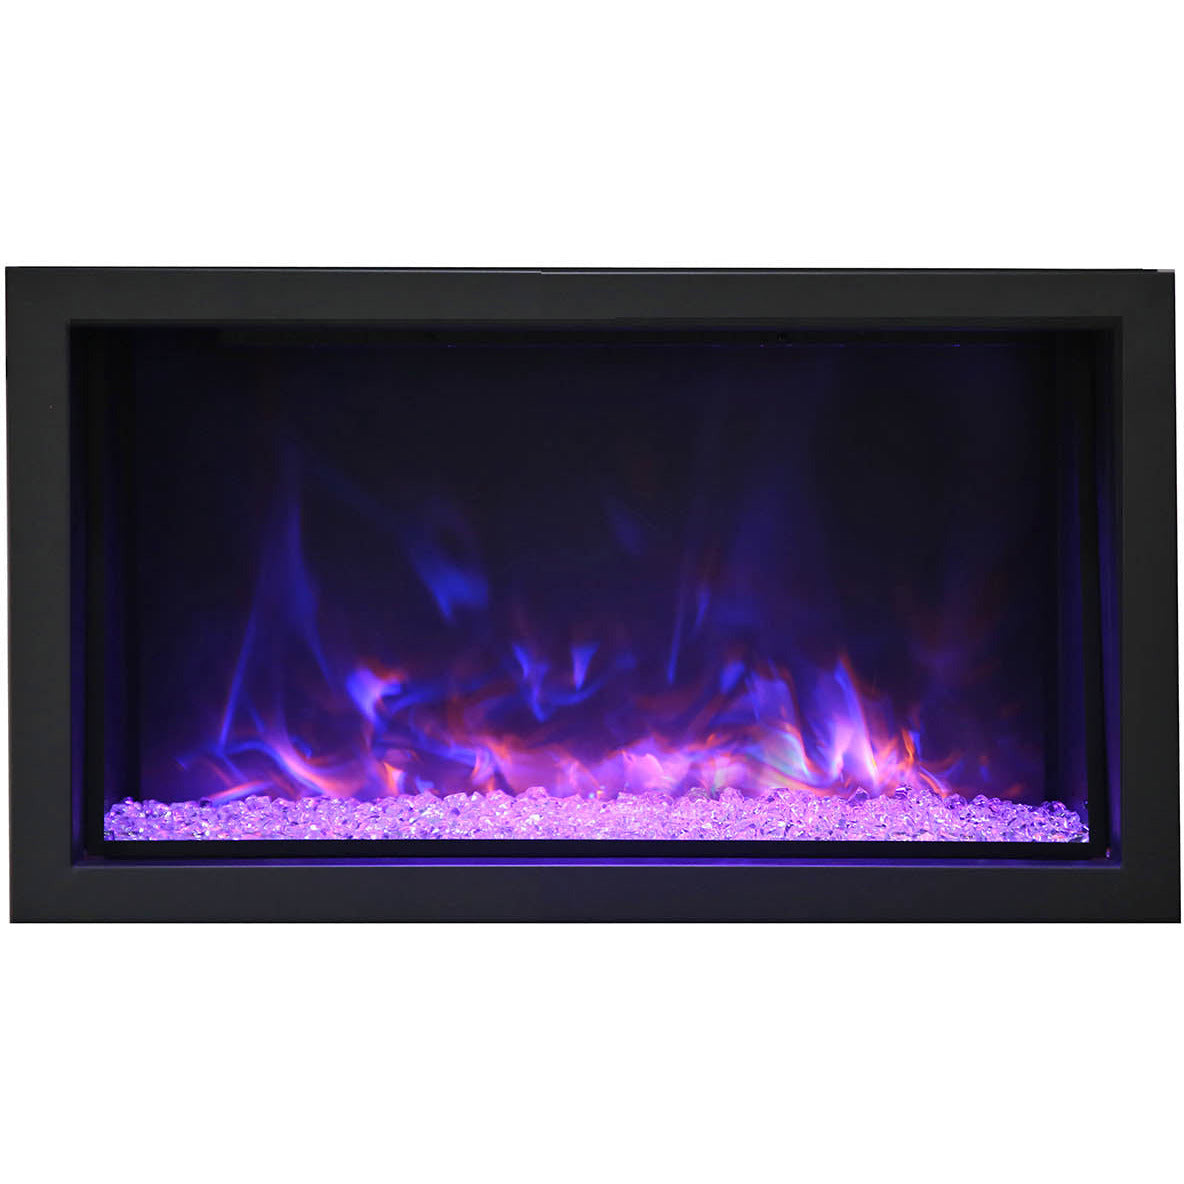 Amantii BI-88-DEEP-XT Panorama Deep & Xtra Tall Full View Smart Electric  - 88" Indoor /Outdoor WiFi Enabled  Fireplace, featuring a MultiFunction Remote, Multi Speed Flame Motor, Glass Media & a Black Trim